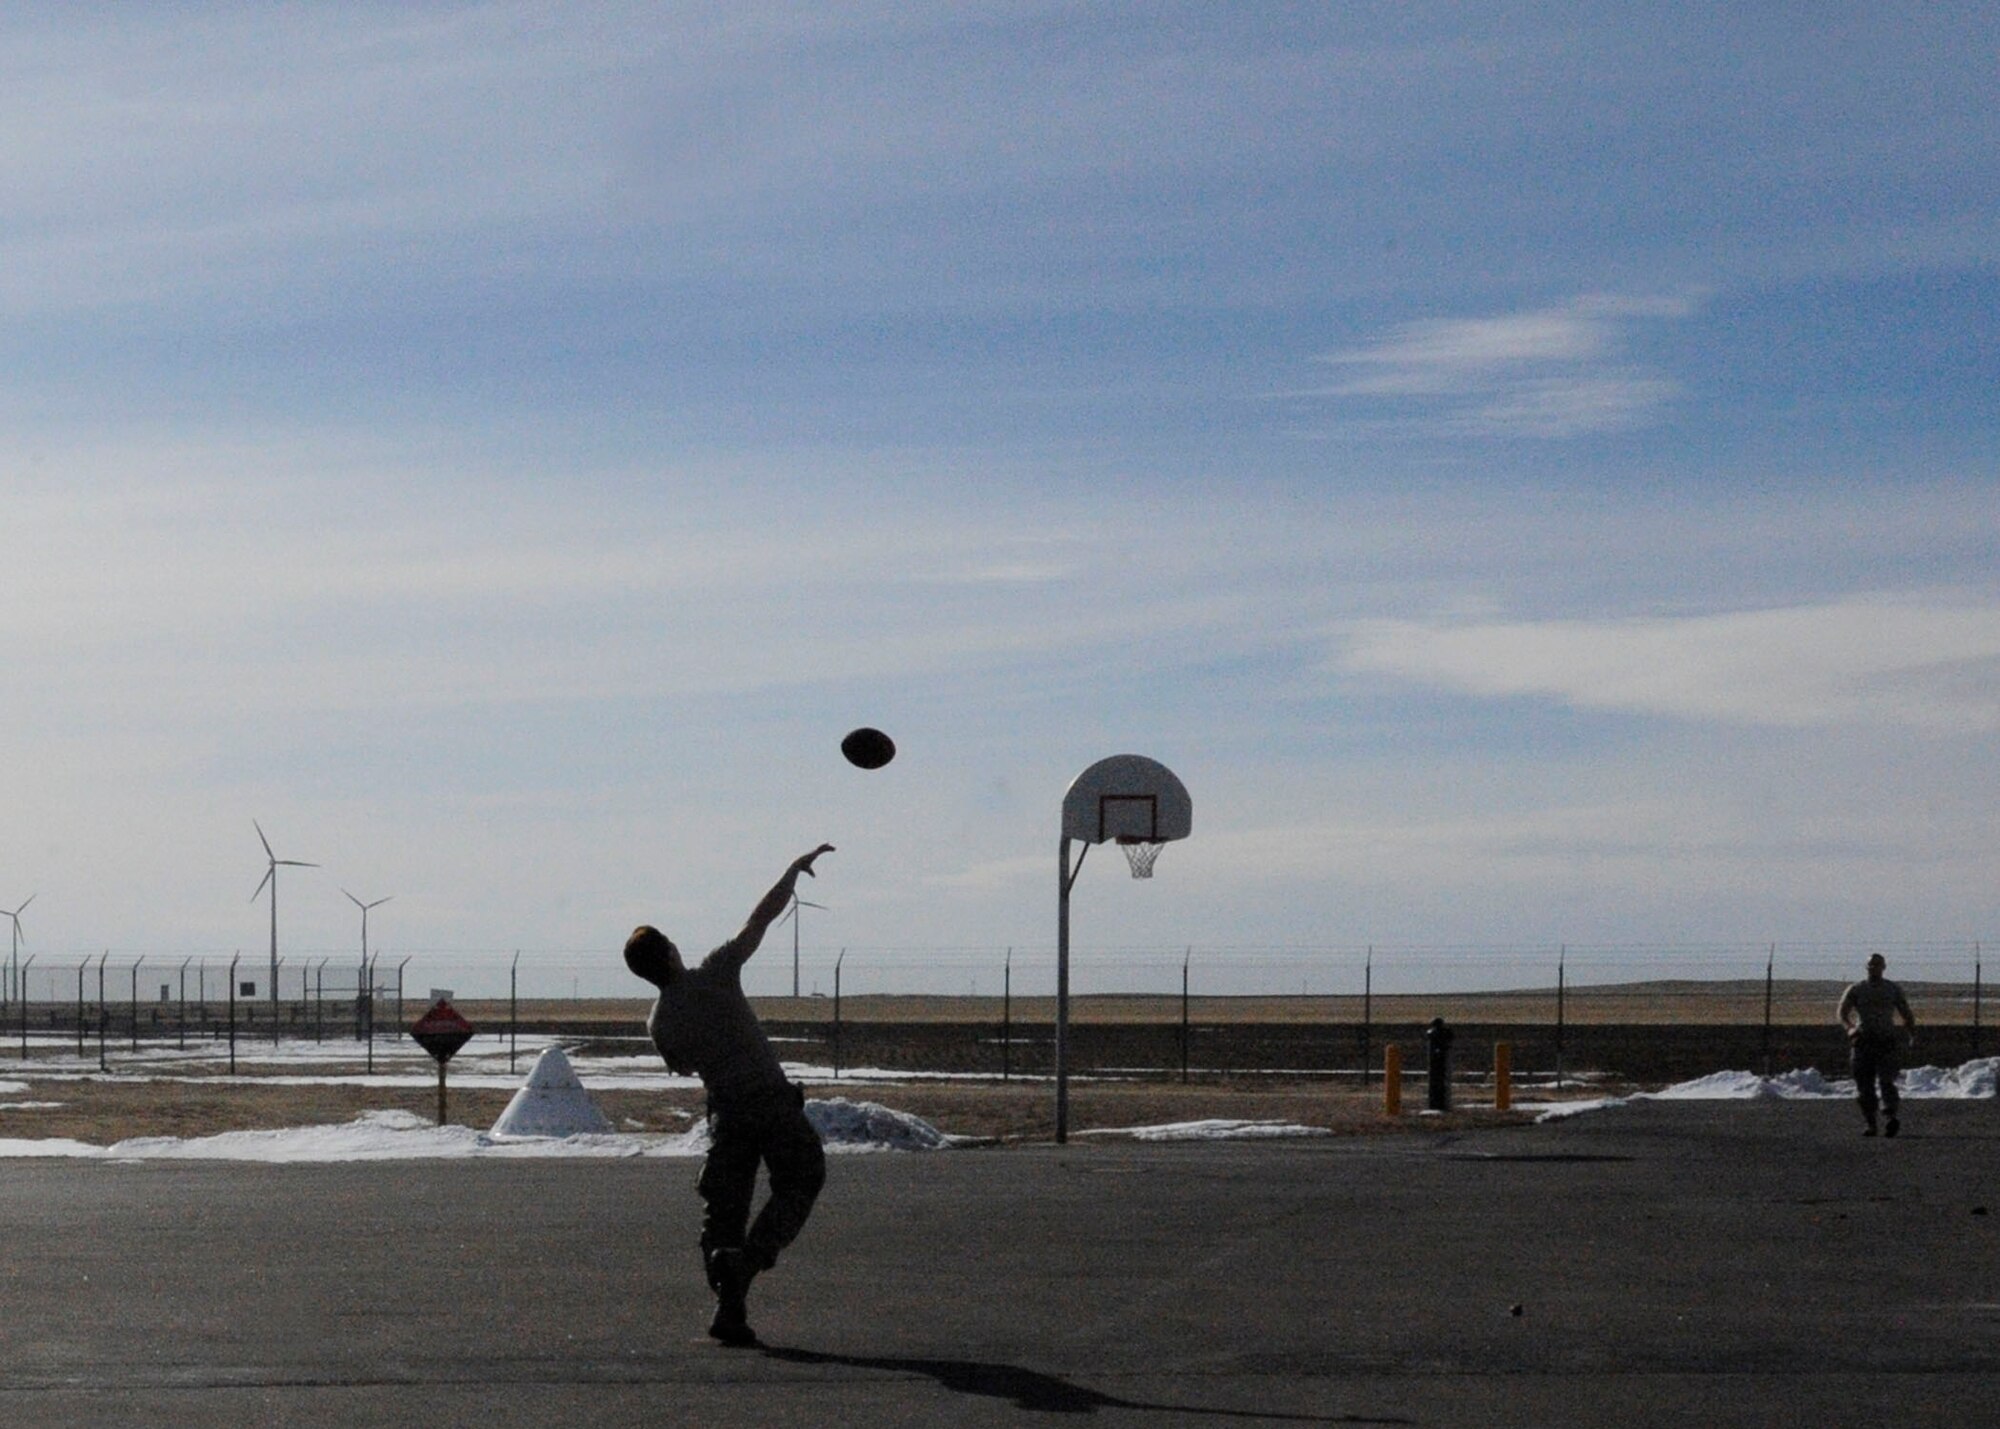 Airman 1st Class Thomas Huenink (left) and Senior Airman Jacob Petersen play catch during a break at a missile alert facility February 28, 2013, in Wyoming. The Airmen who work at the MAF live and work at the facility 24/7 during their three-or four-day shifts. Huenink and Petersen are assigned to the 90th Missile Security Forces Squadron. (U.S. Air Force photo/Tech. Sgt. Mareshah Haynes)